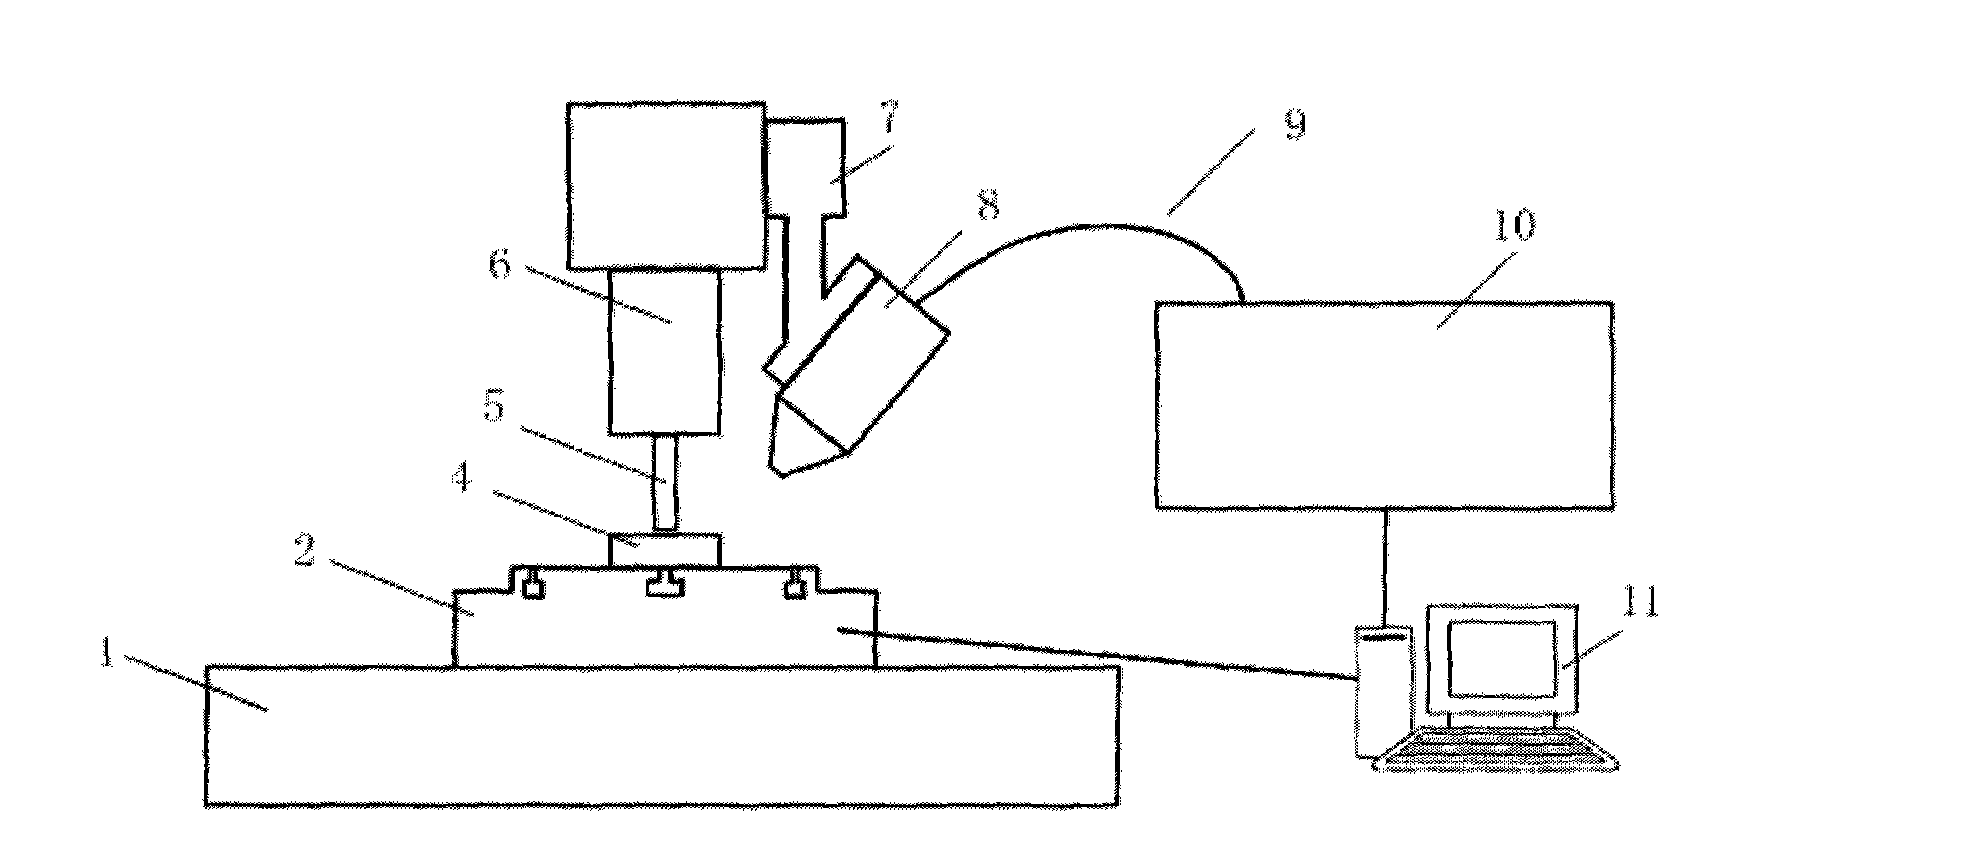 Auxiliary laser heating milling device and method